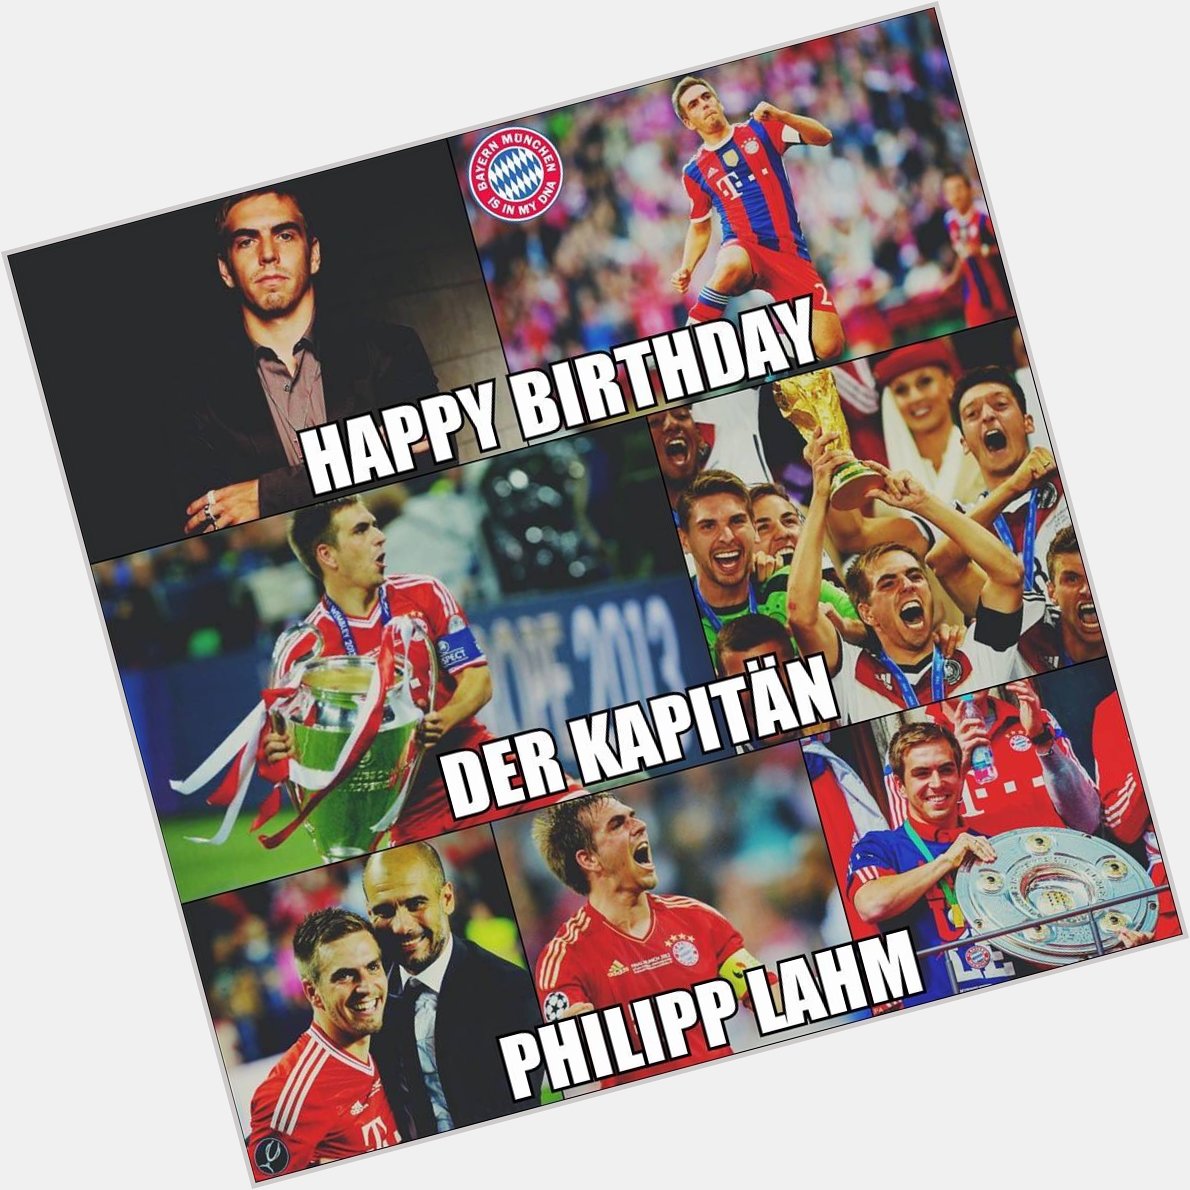 \" There is Philipp Lahm. The most consistent player you\ll ever see. \" - Leo Messi. 

HAPPY BIRTHDAY LEGEND 